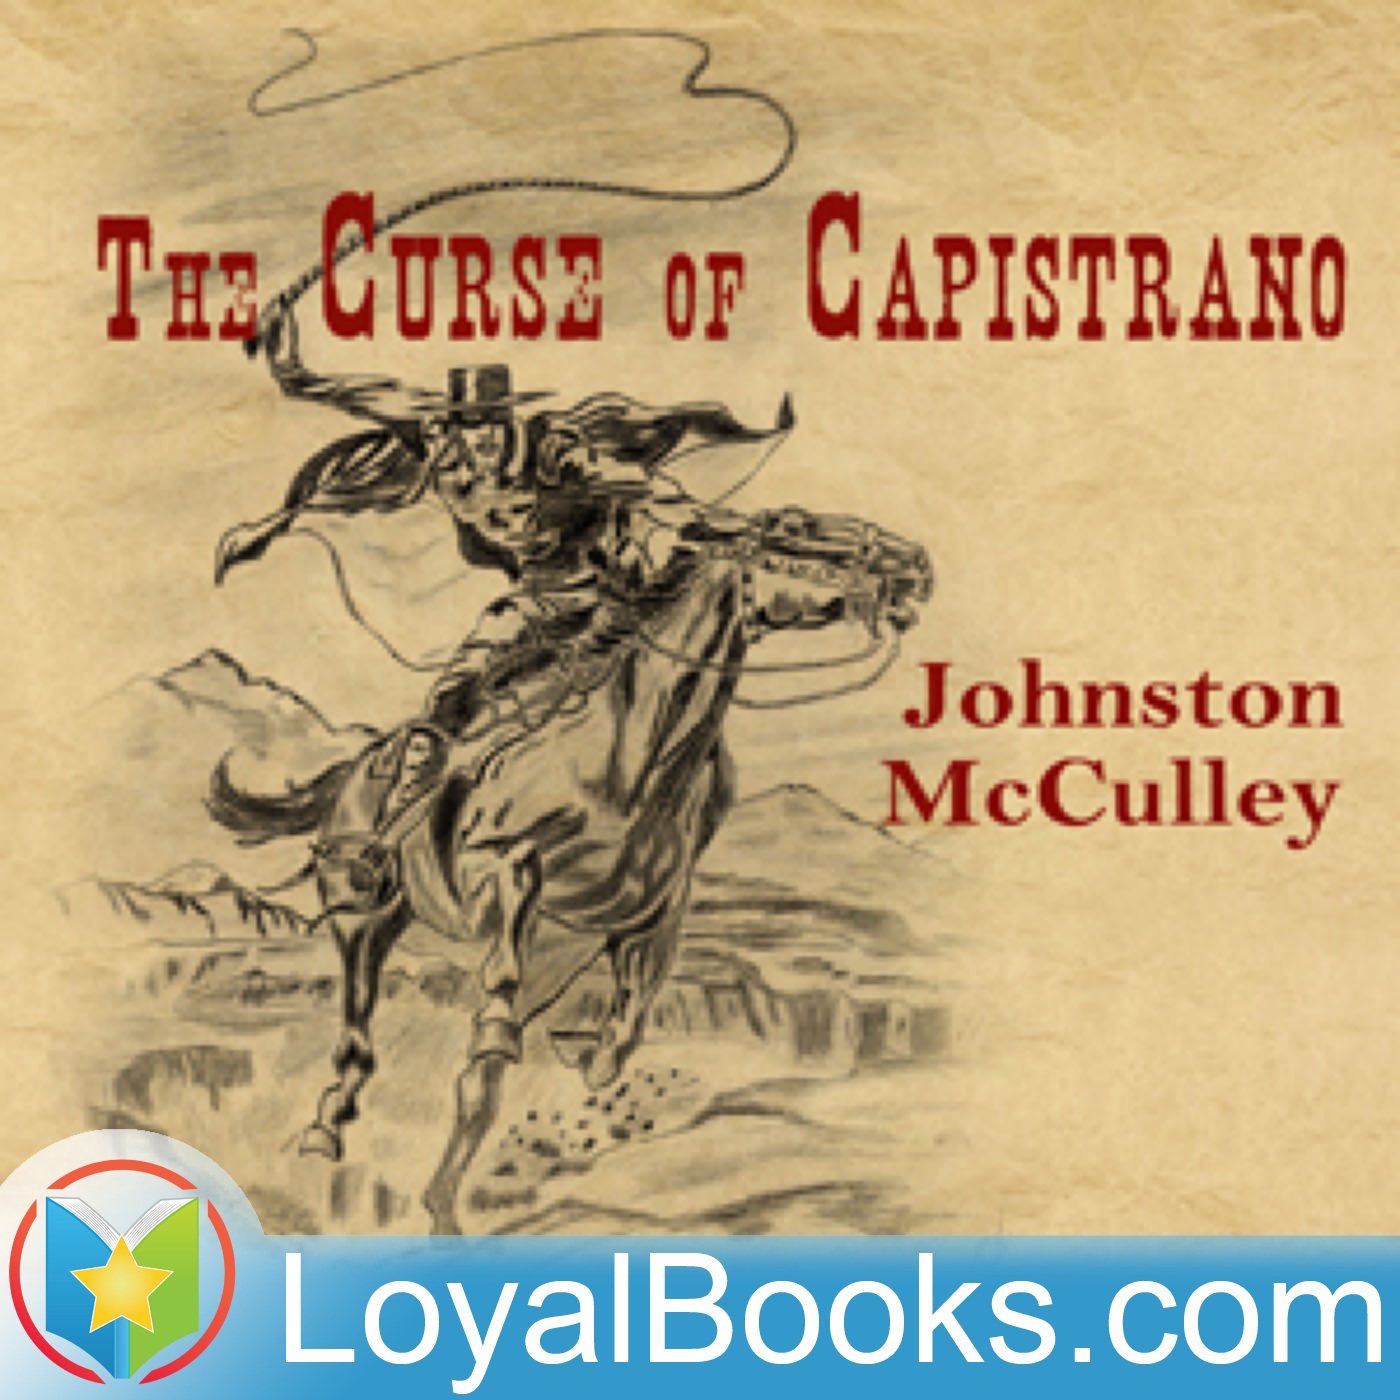 The Curse of Capistrano by Johnston McCulley